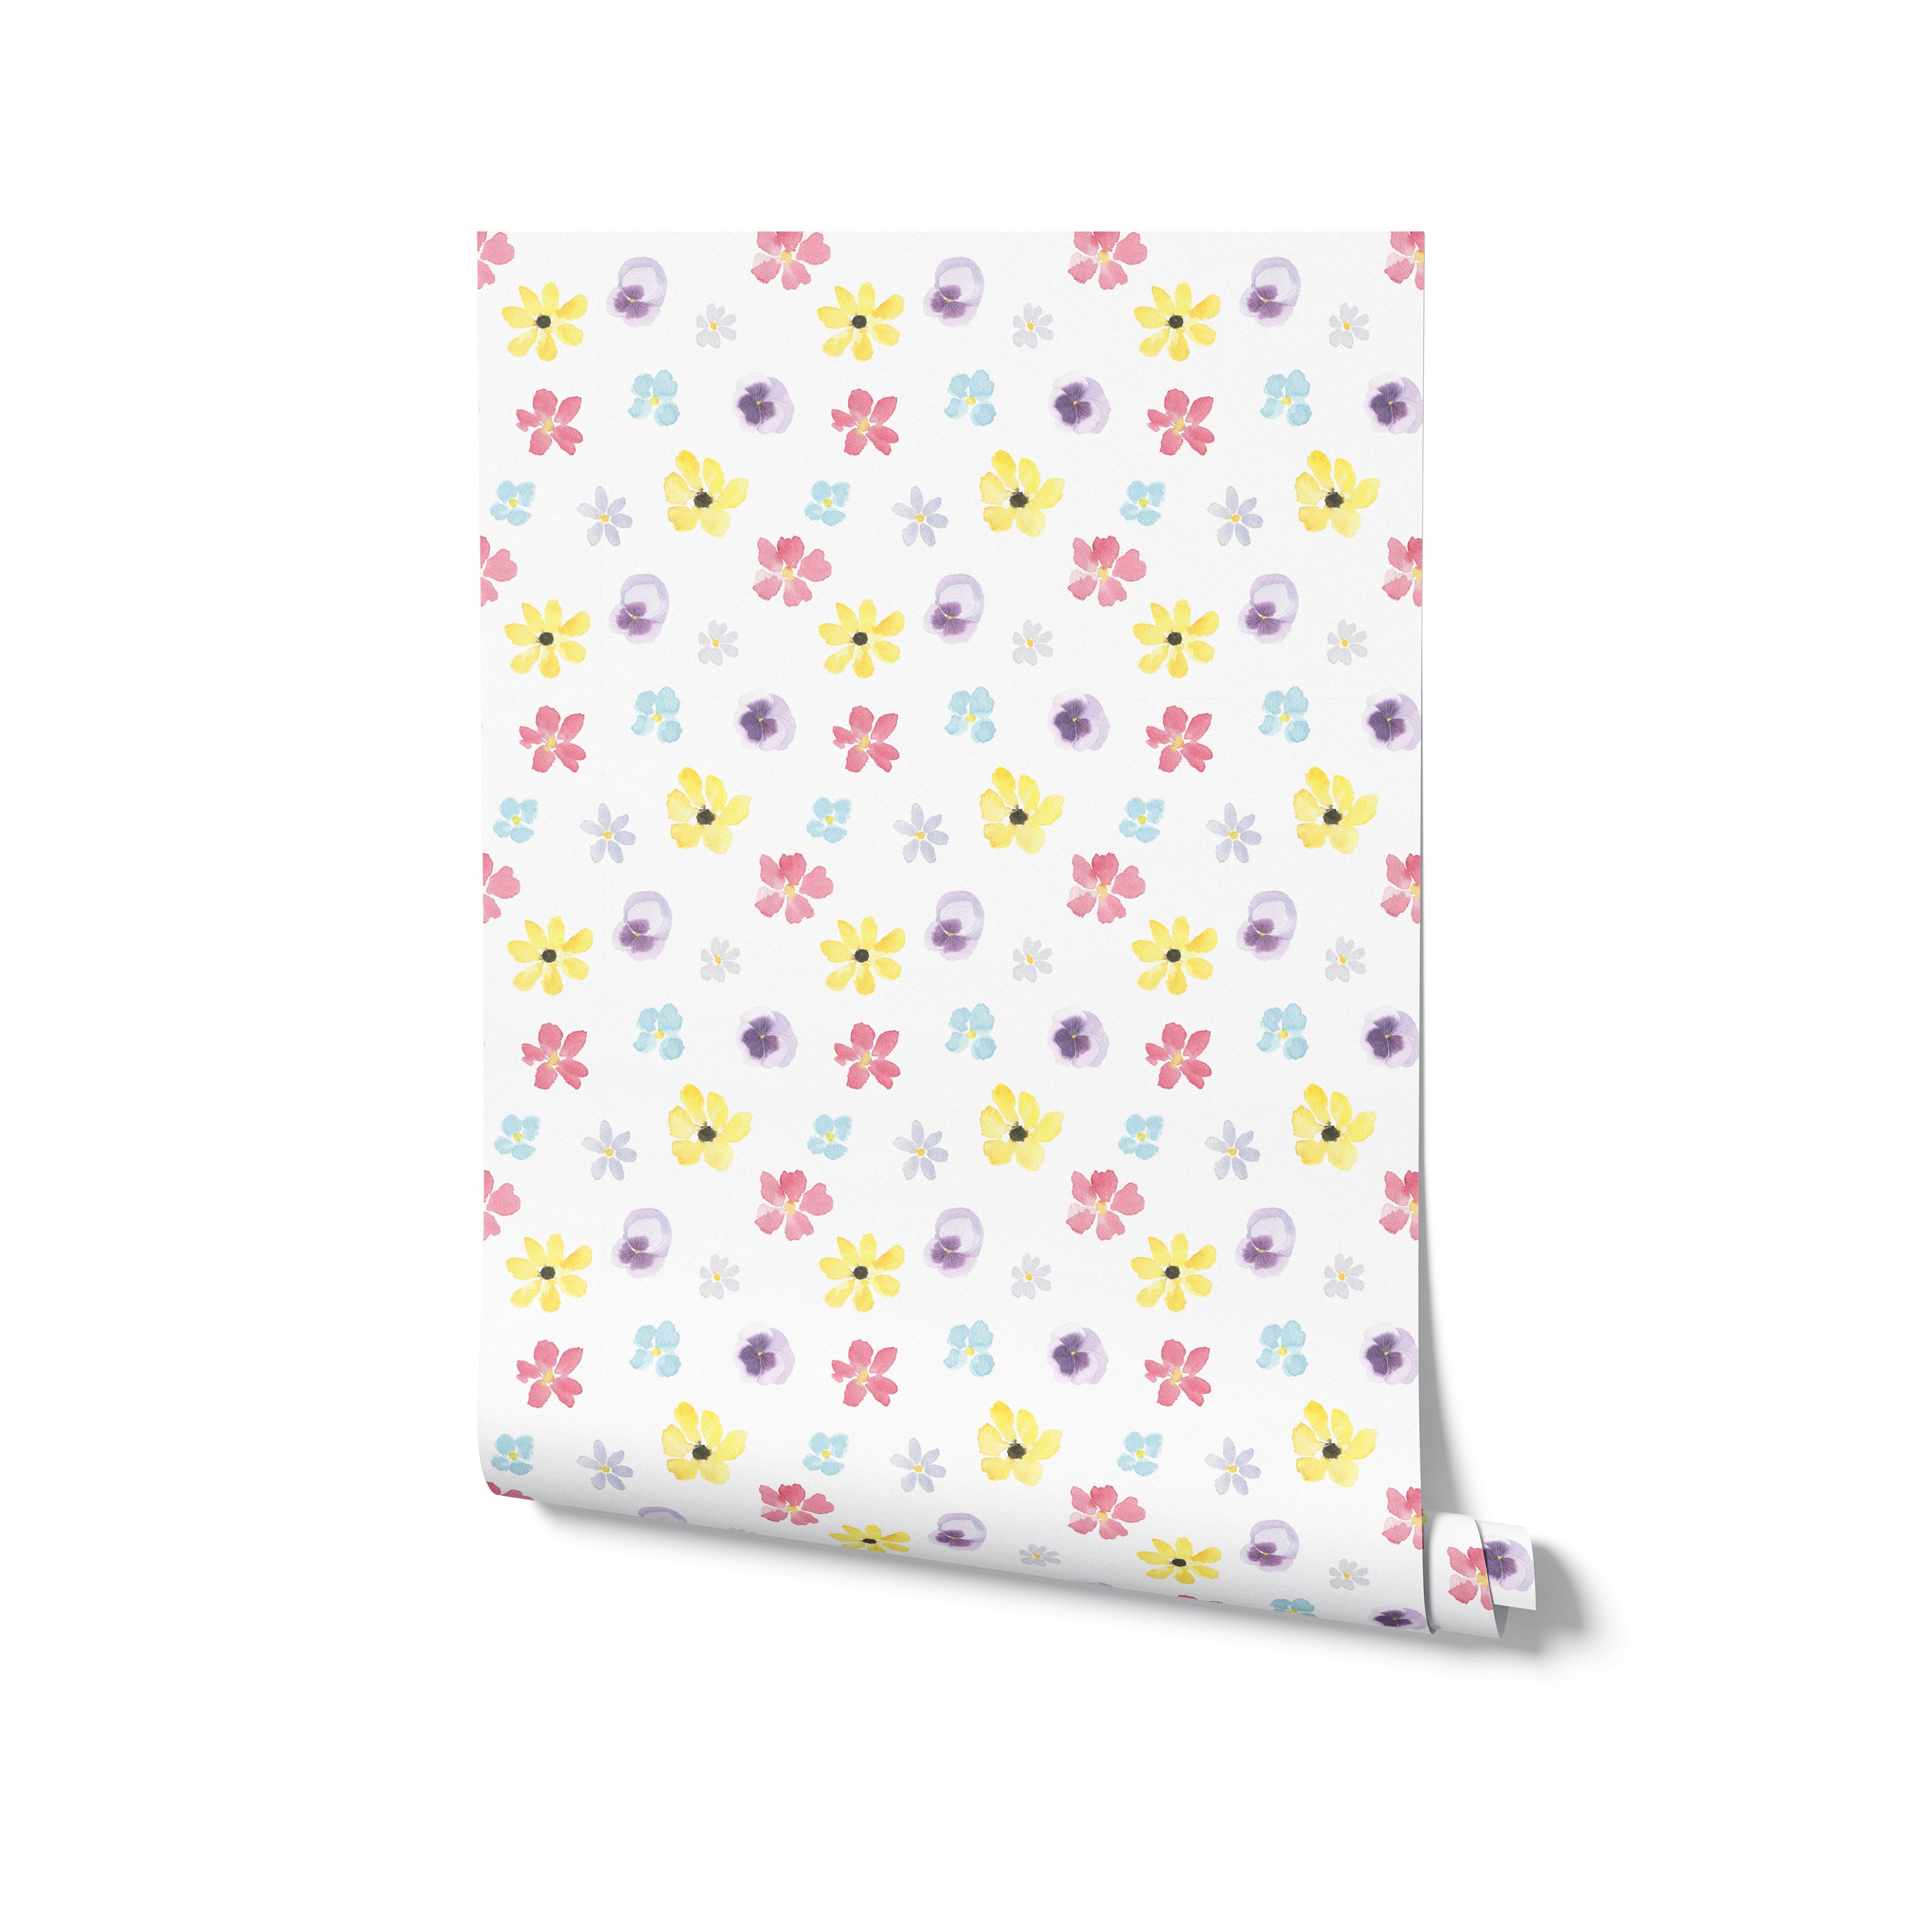 A roll of Spring Field Wallpaper - VI displaying its continuous pattern of colorful watercolor flowers in yellow, pink, purple, and blue on a white background, perfect for adding a burst of color to any room.